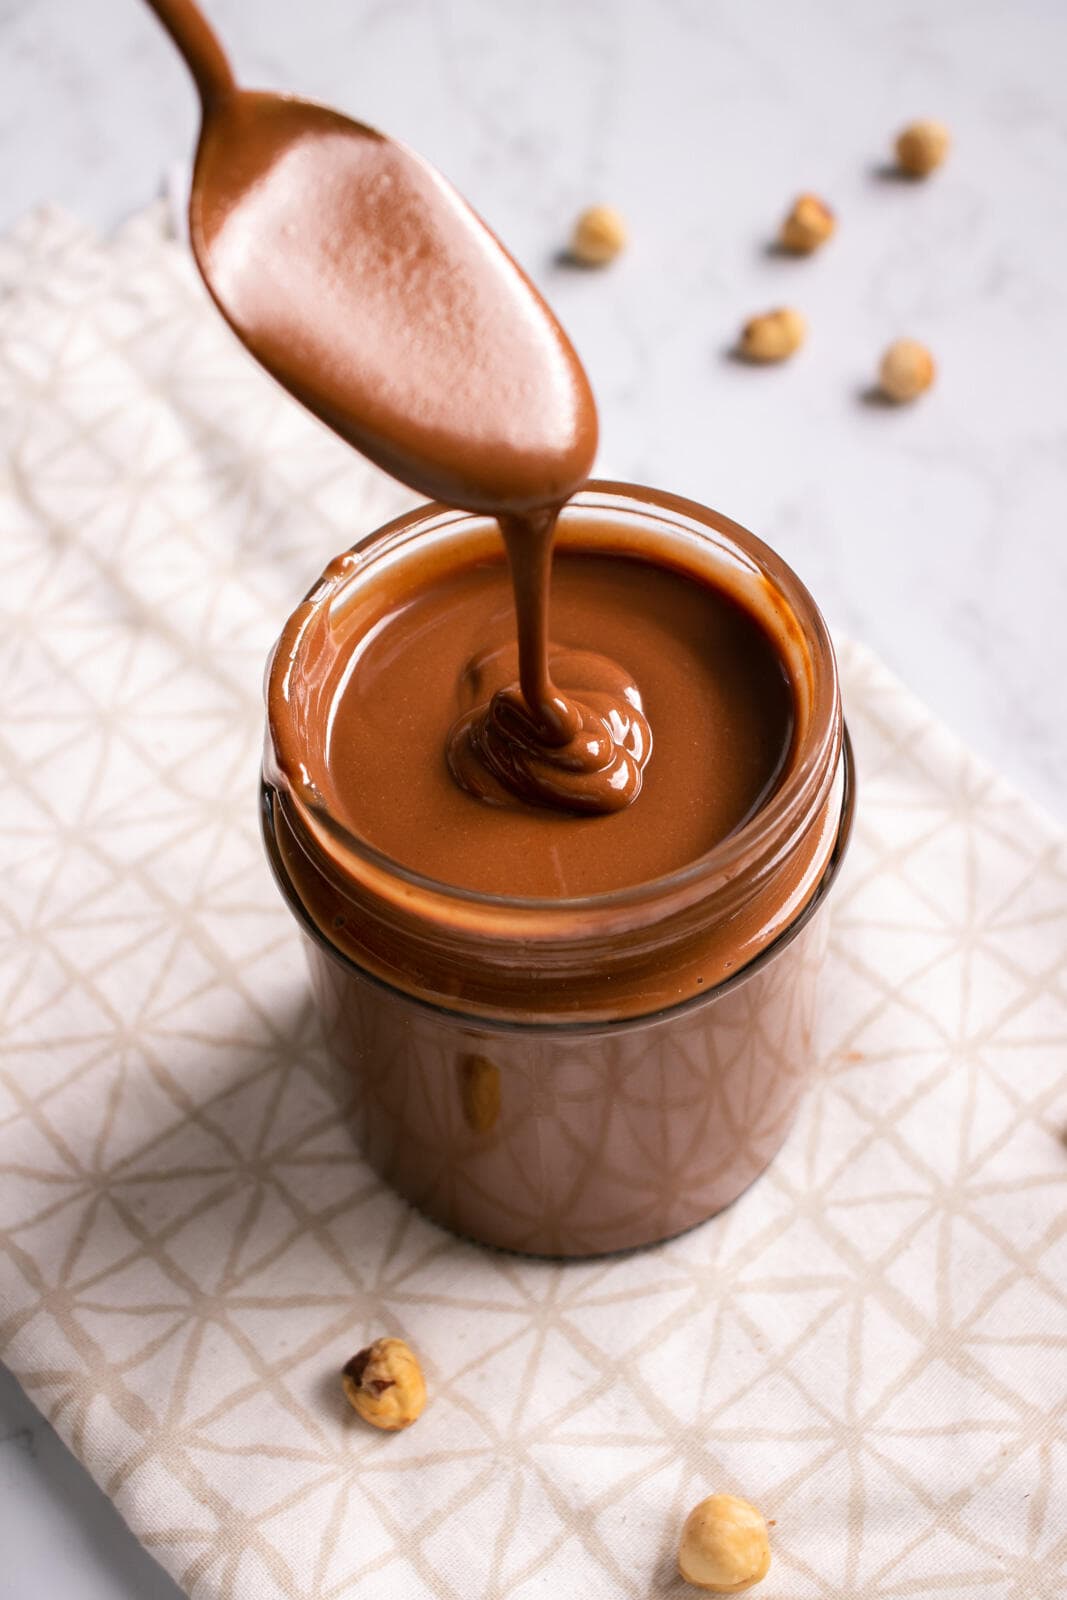 How to Make Homemade Nutella